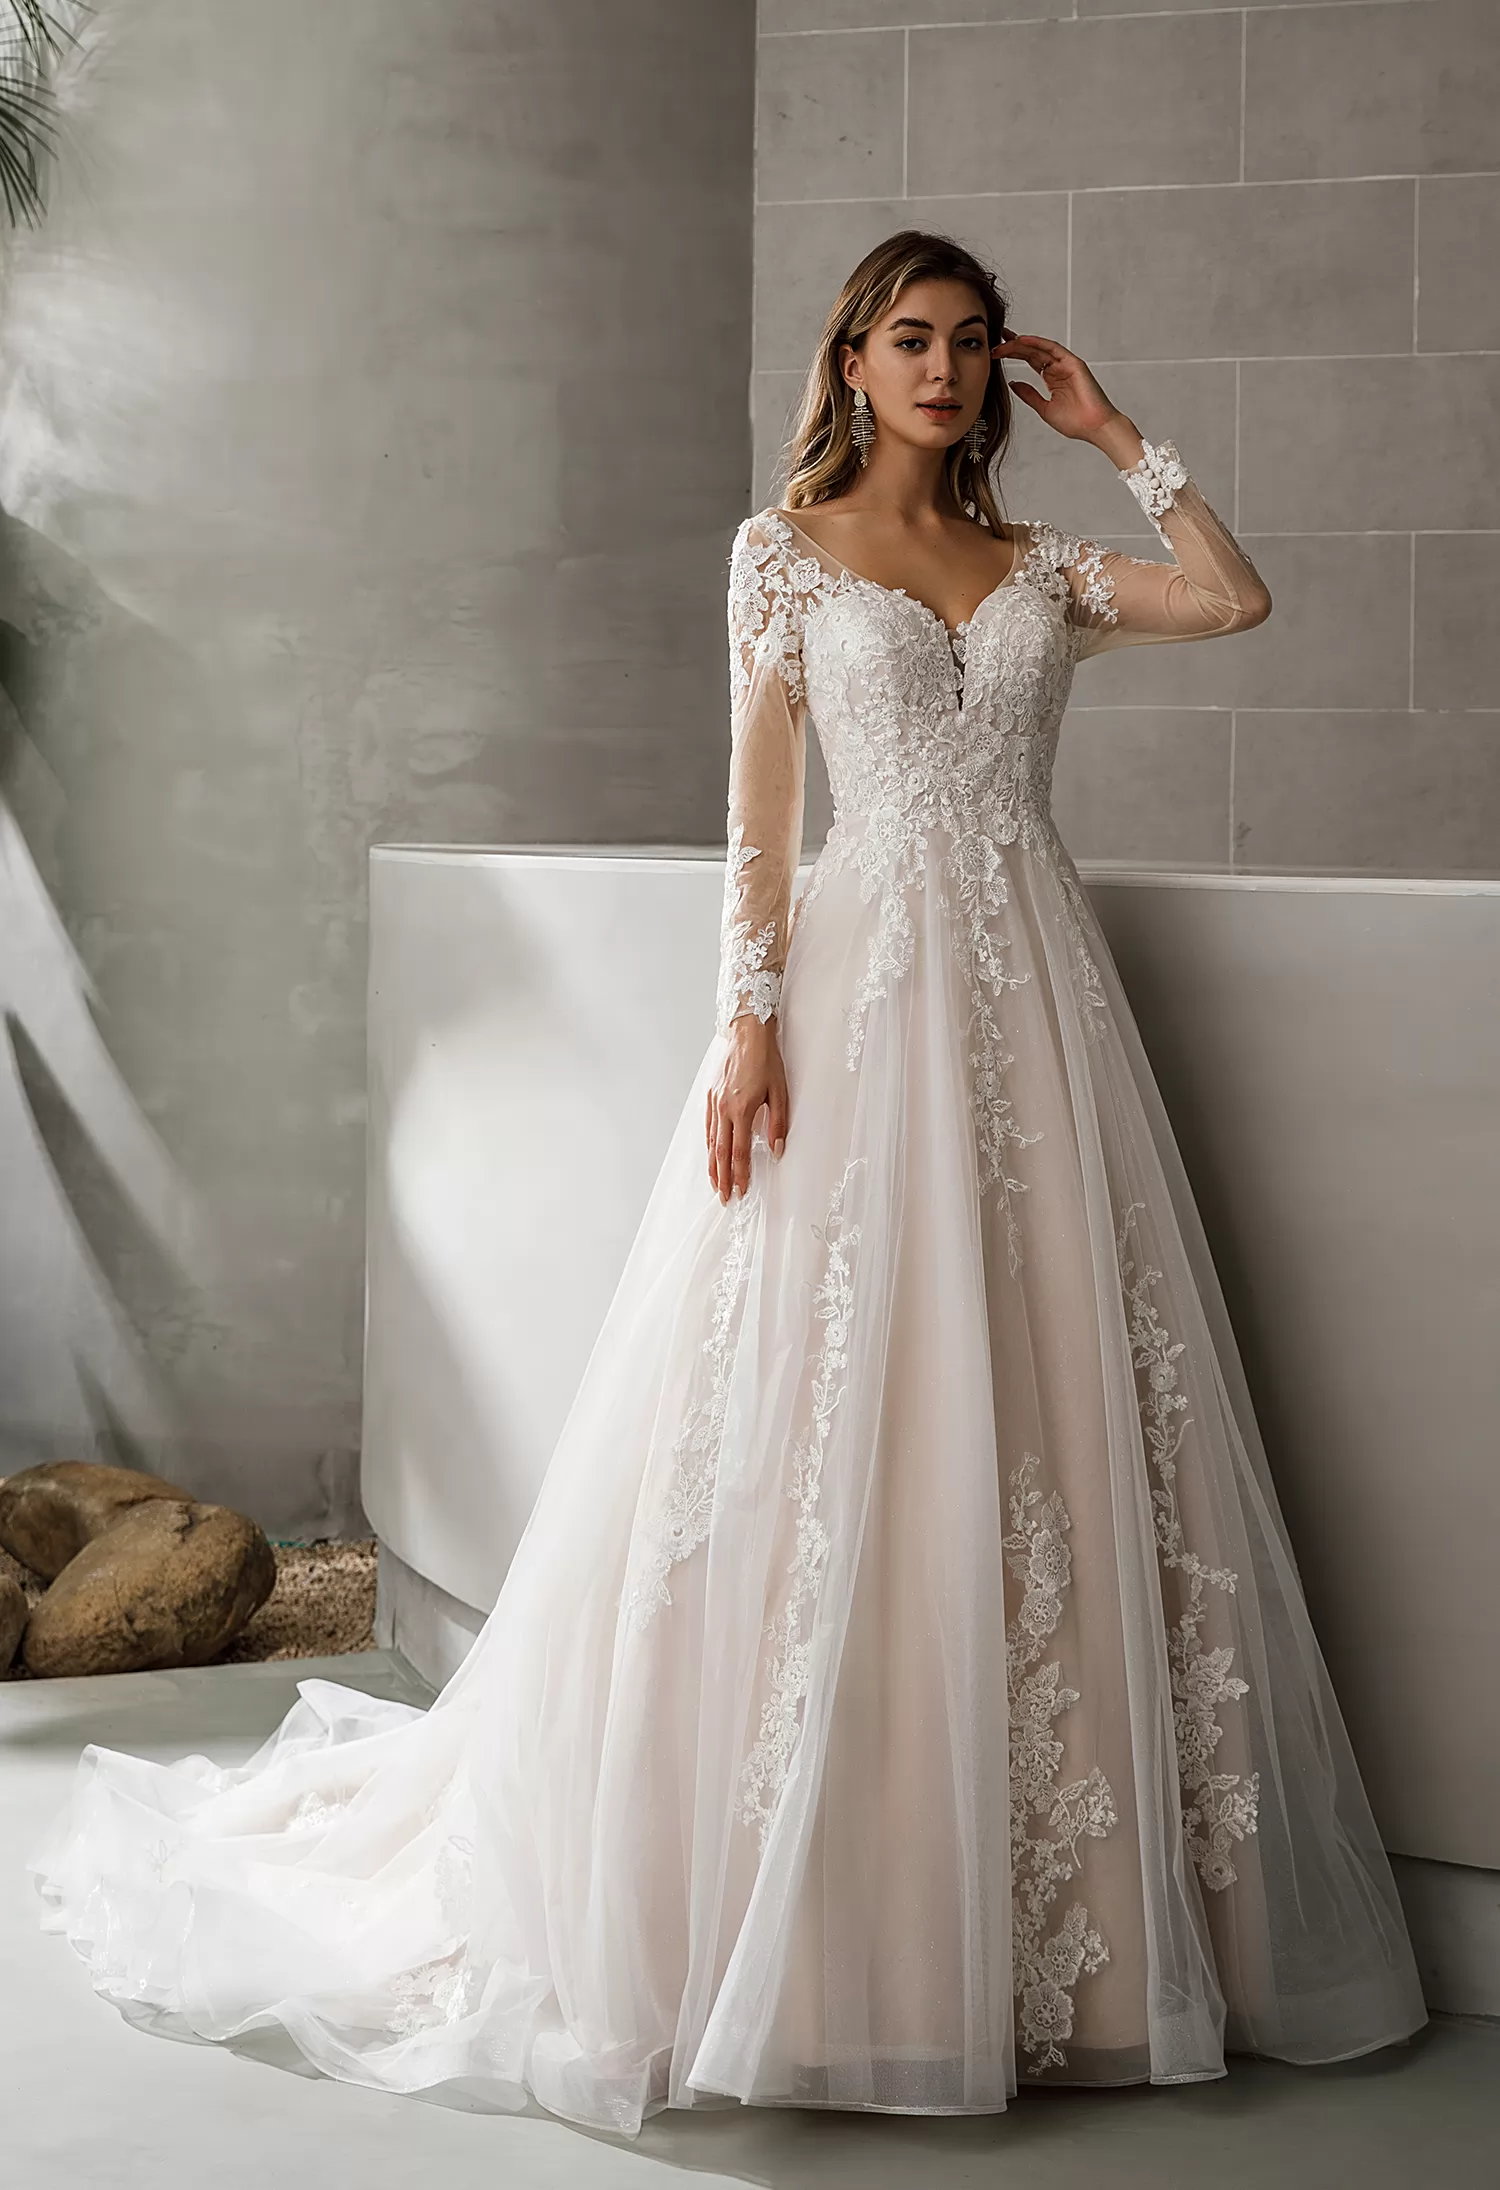 Classic Princess Wedding Dress With V-neck and Long Sleeves